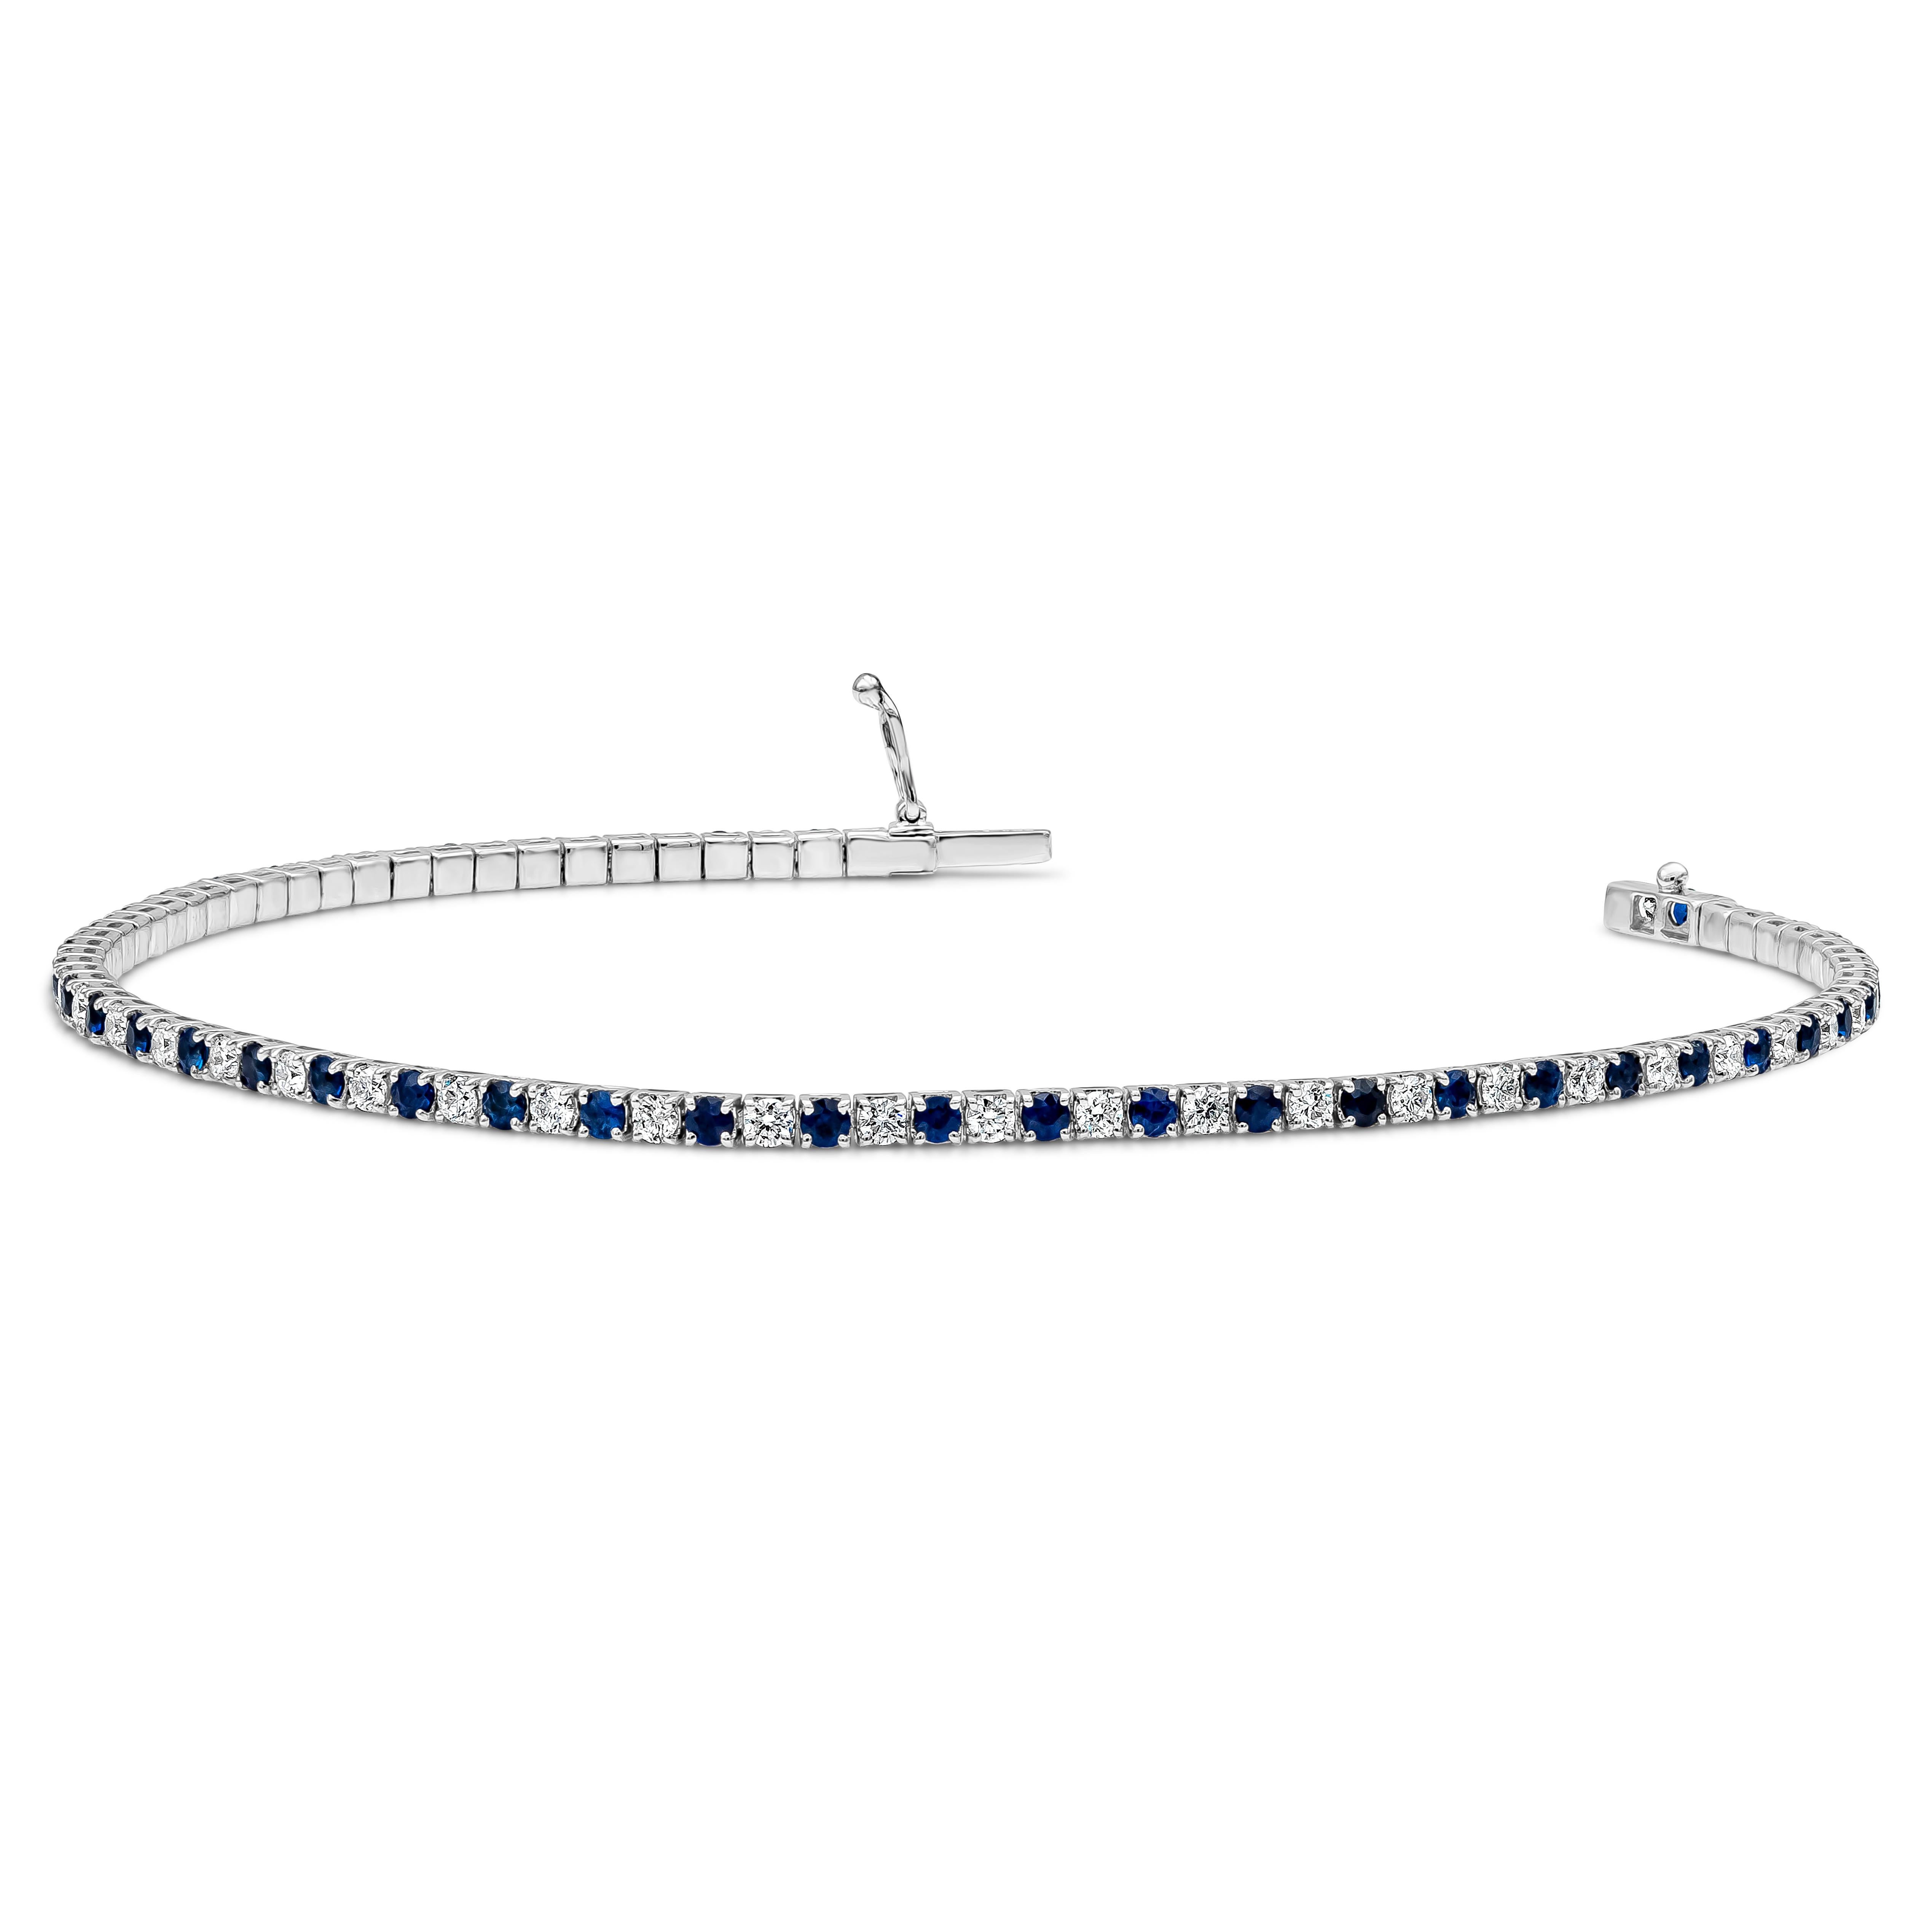 This tennis bracelet features a row of alternating round brilliant cut blue sapphires and round brilliant cut diamonds. Blue Sapphire weighs 1.39 carats and diamonds weigh 0.99 carats in F color and VS-SI in Clarity. Made with 18K White Gold. 7